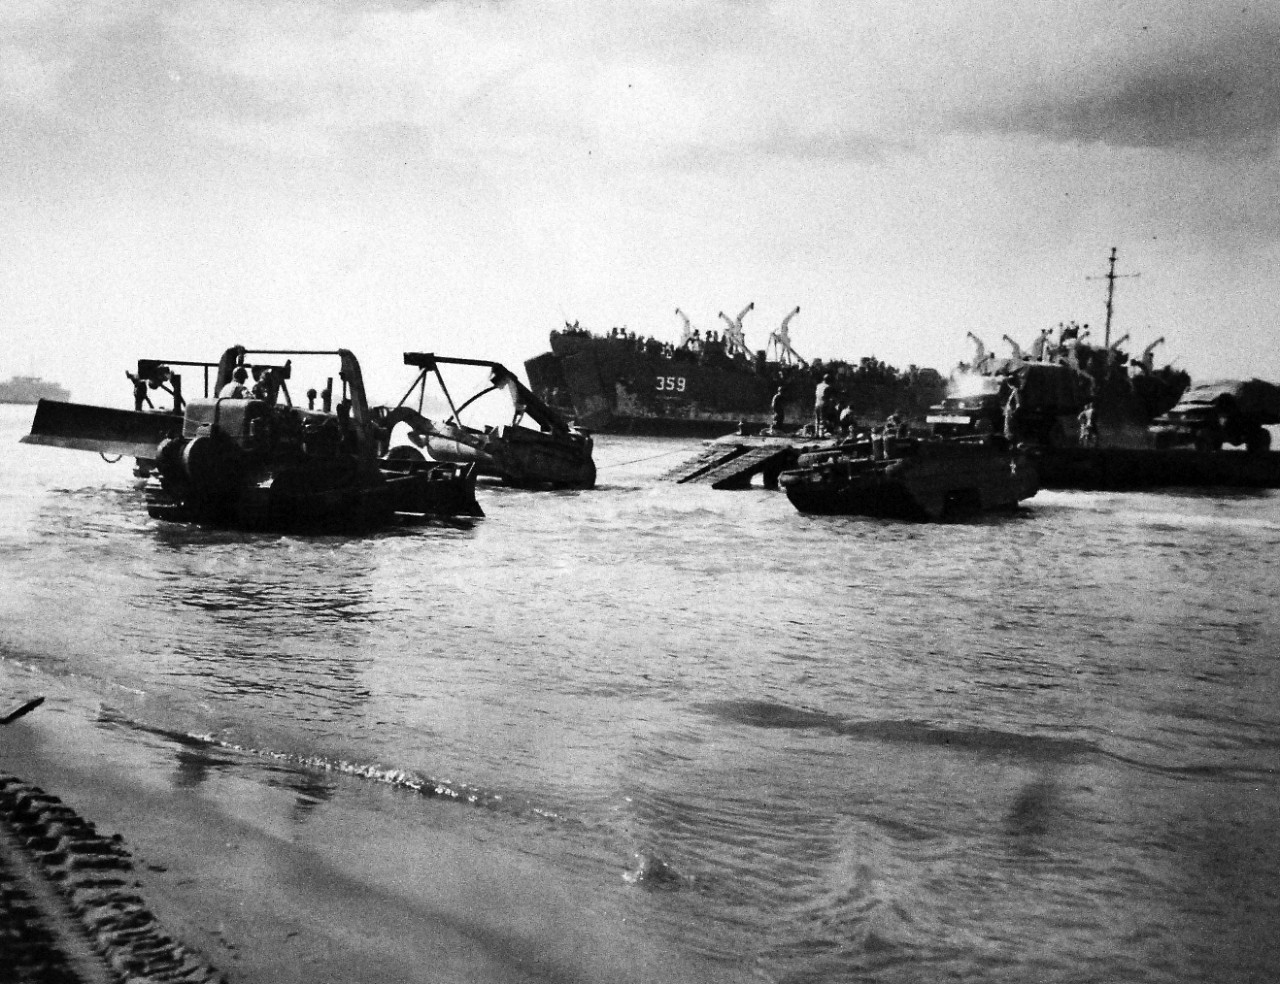 26-G-2005:   Operation Avalanche, September 1943.  Invaders Disgorged Through Bow.  Hitherto kept secret, the open doors of an LST (Landing Ship, Tanks) is shown in this photograph by a U.S. Coast Guard combat photographer.  Picture was taken at Paestum, south of Salerno, and shows bulldozers, amphibious “duck trucks” and other heavy equipment being unloaded.  The opening bow doors are probably the most revolutionary development in amphibious operations in this war.  Coast Guardsmen and Navy personnel ma LSTs and other landing craft.     Official Coast Guard Photograph, RG-G-2005. Photographed through Mylar sleeve.   Courtesy of the Library of Congress.  (2016/05/19). 